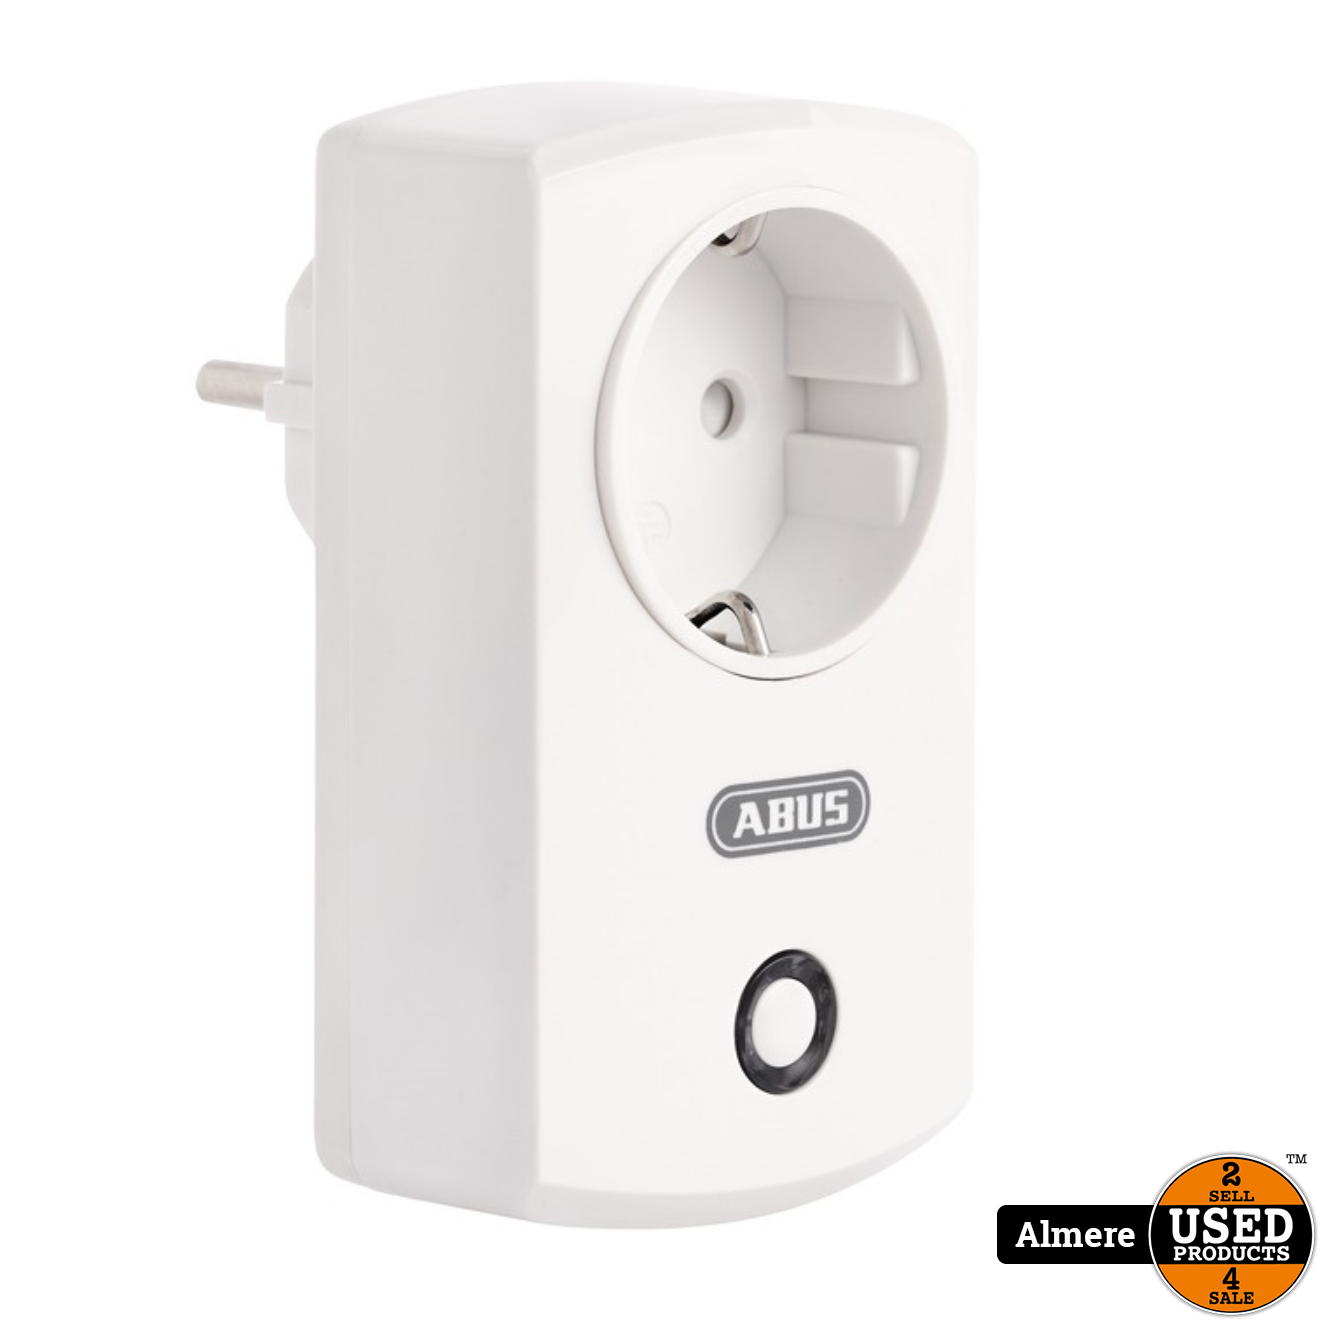 ABUS stopcontact FUHA35000A | Nieuw - Used Products Almere